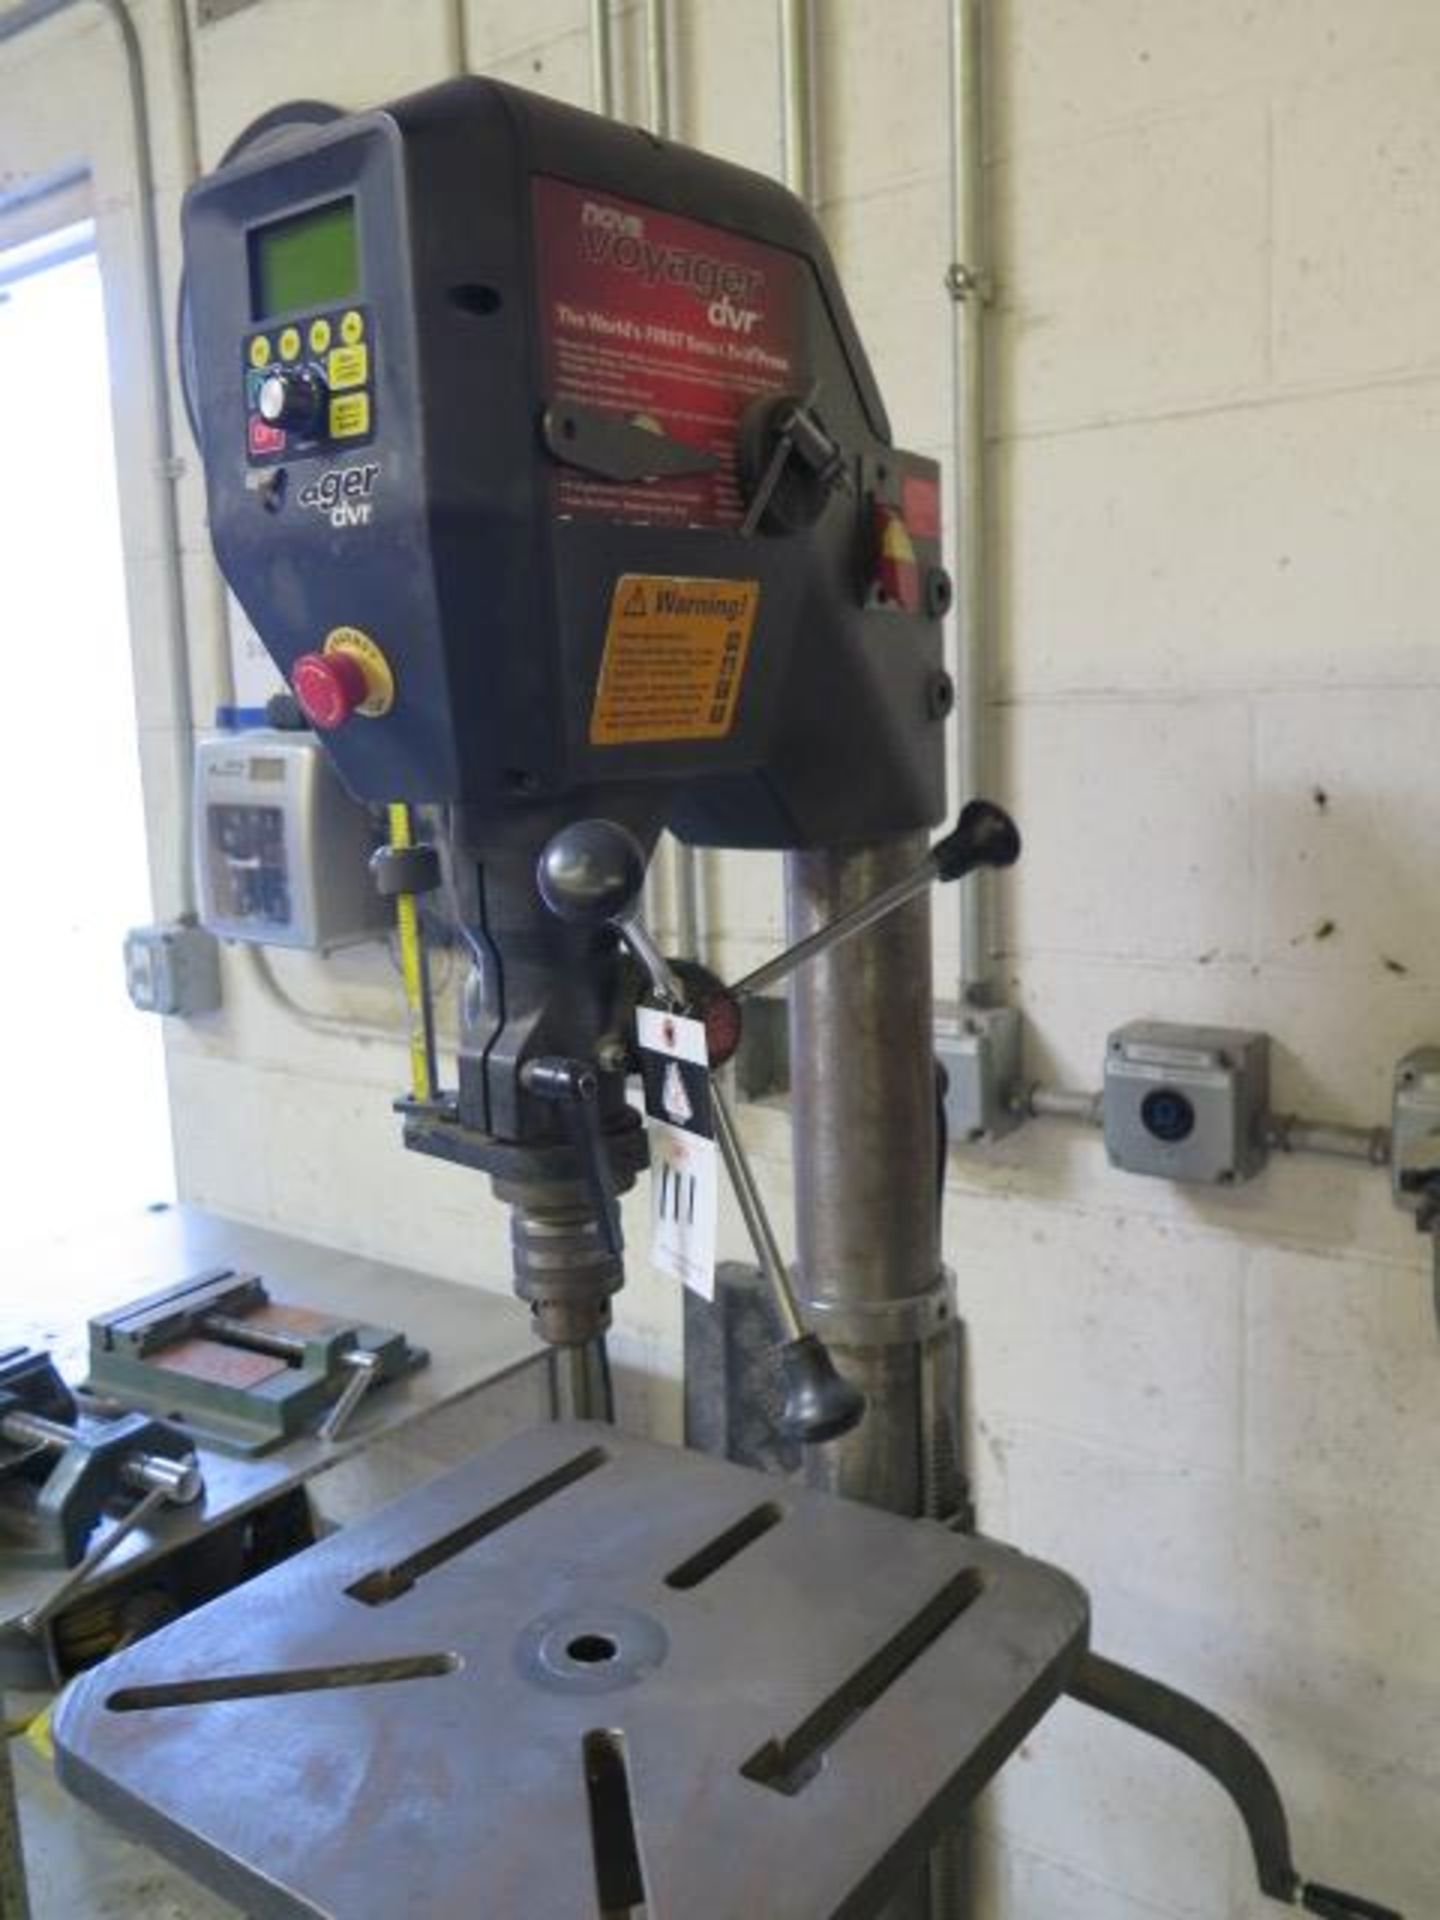 Nova Voyager DVR "Smart Drill Press" s/n 00302375 w/ Digital, 50-3000 Variable RPM, SOLD AS IS - Image 3 of 14